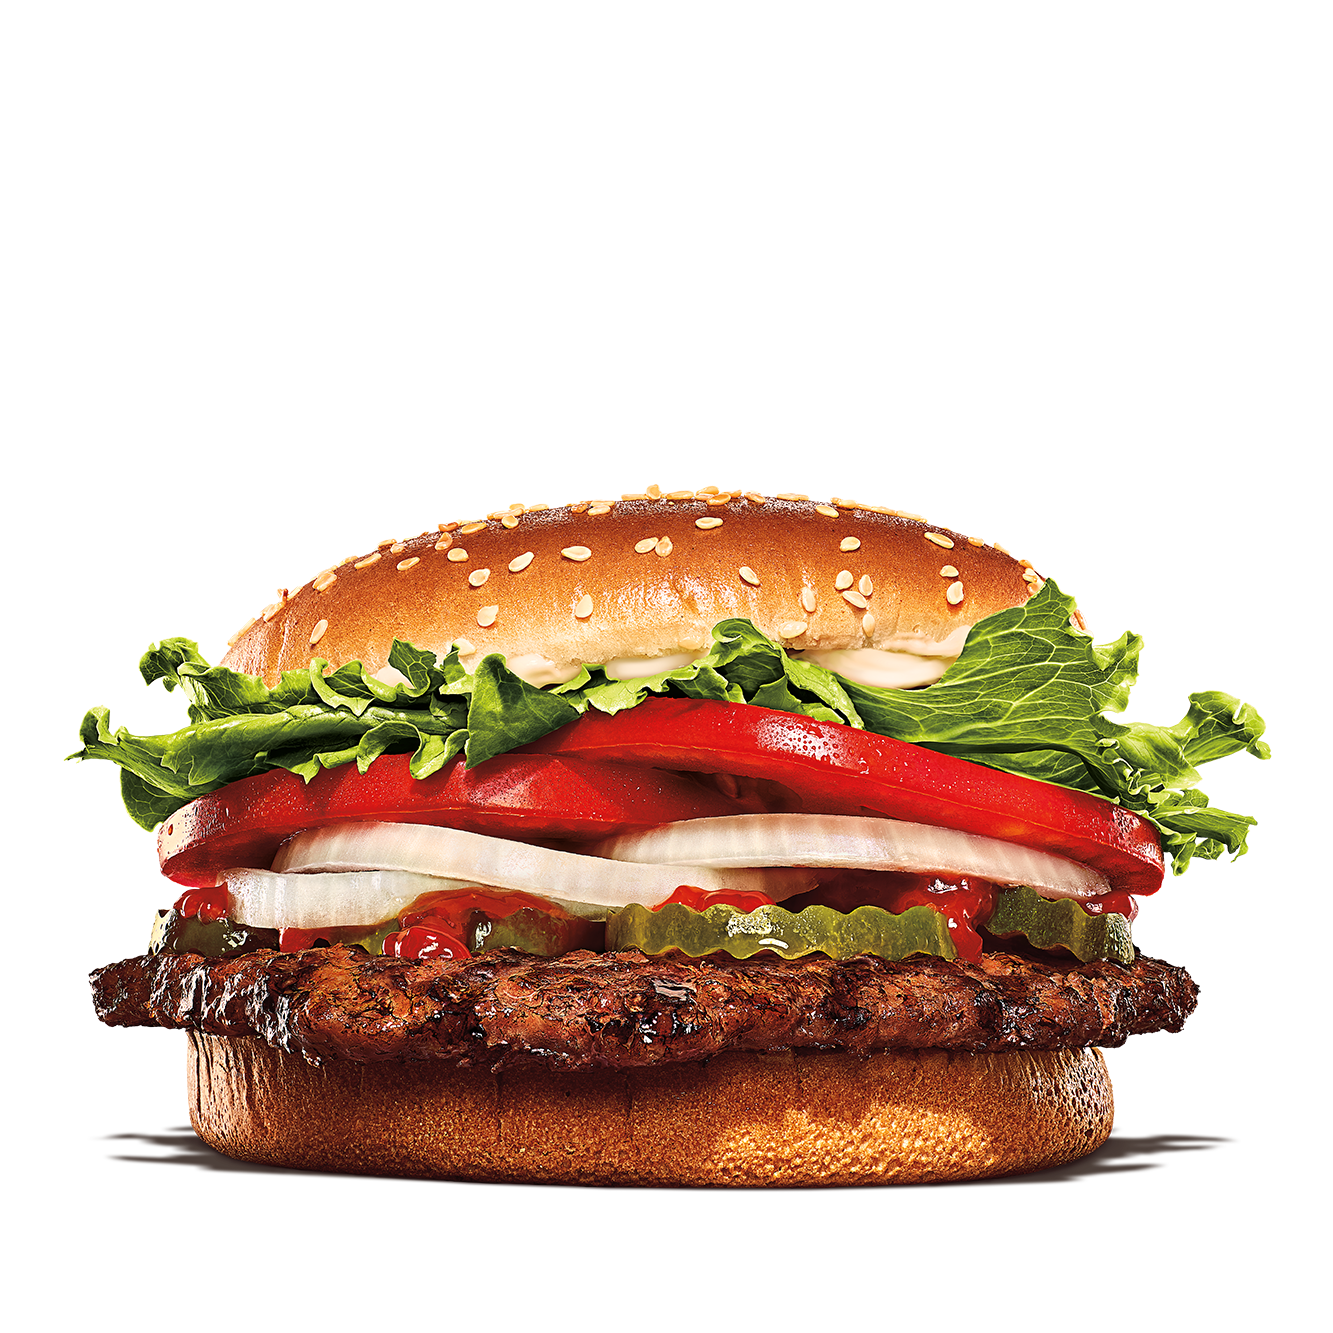 Calories in Burger King Whopper